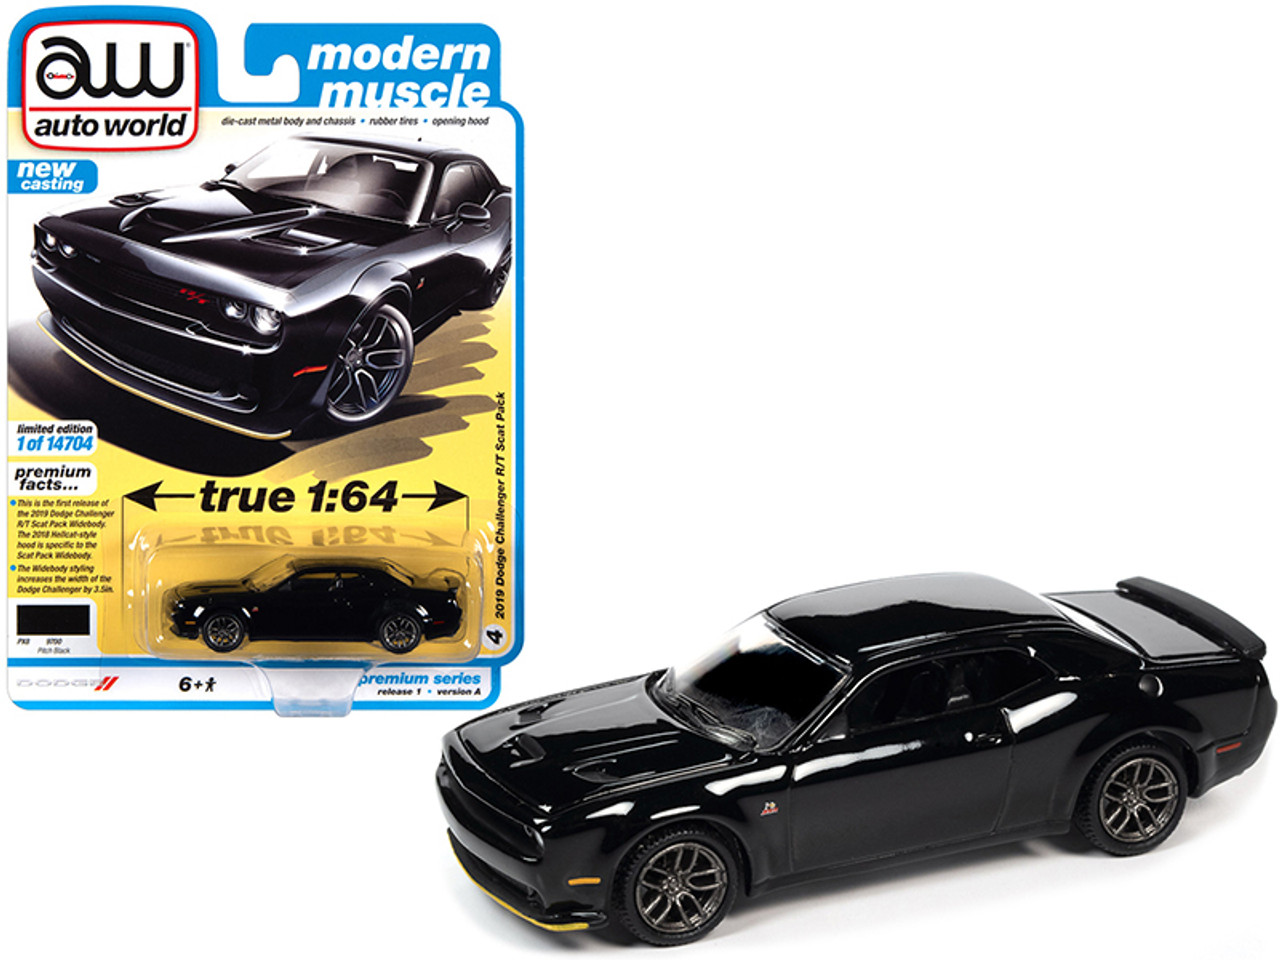 2019 Dodge Challenger R/T Scat Pack Pitch Black "Modern Muscle" Limited Edition to 14704 pieces Worldwide 1/64 Diecast Model Car by Autoworld